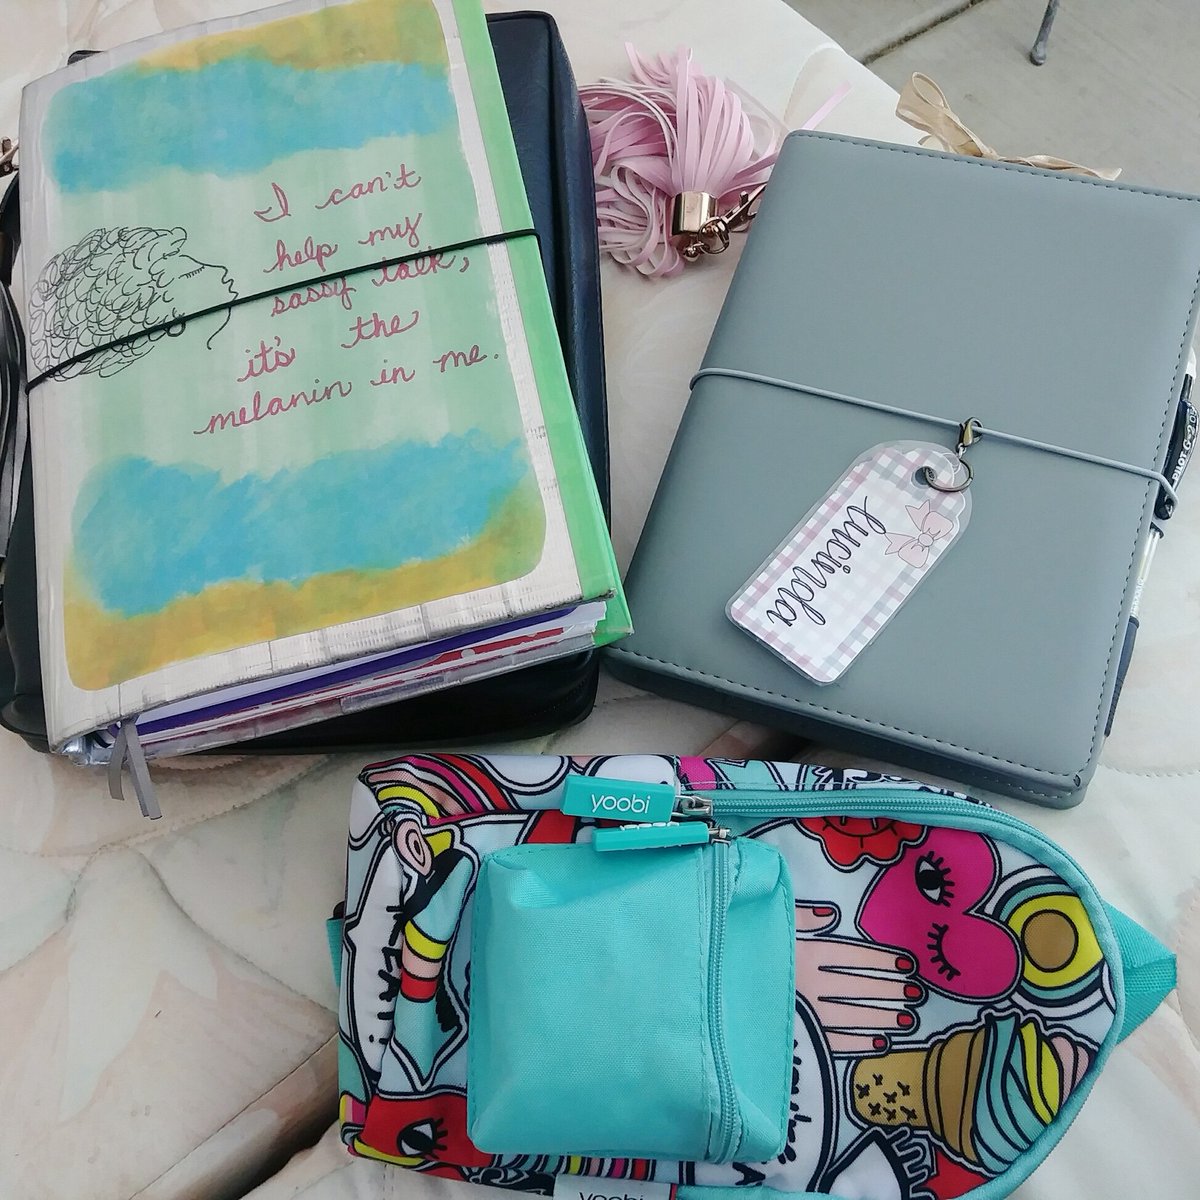 Rockin' That #Planner Life On The Patio!
#thatplannerlife #plannerlife #plannergirl #plannerbabe #plannerinspiration #travelersnotebook #travelersnotebooks #pencase #pencilcase #multipleplanners #walmartfinds